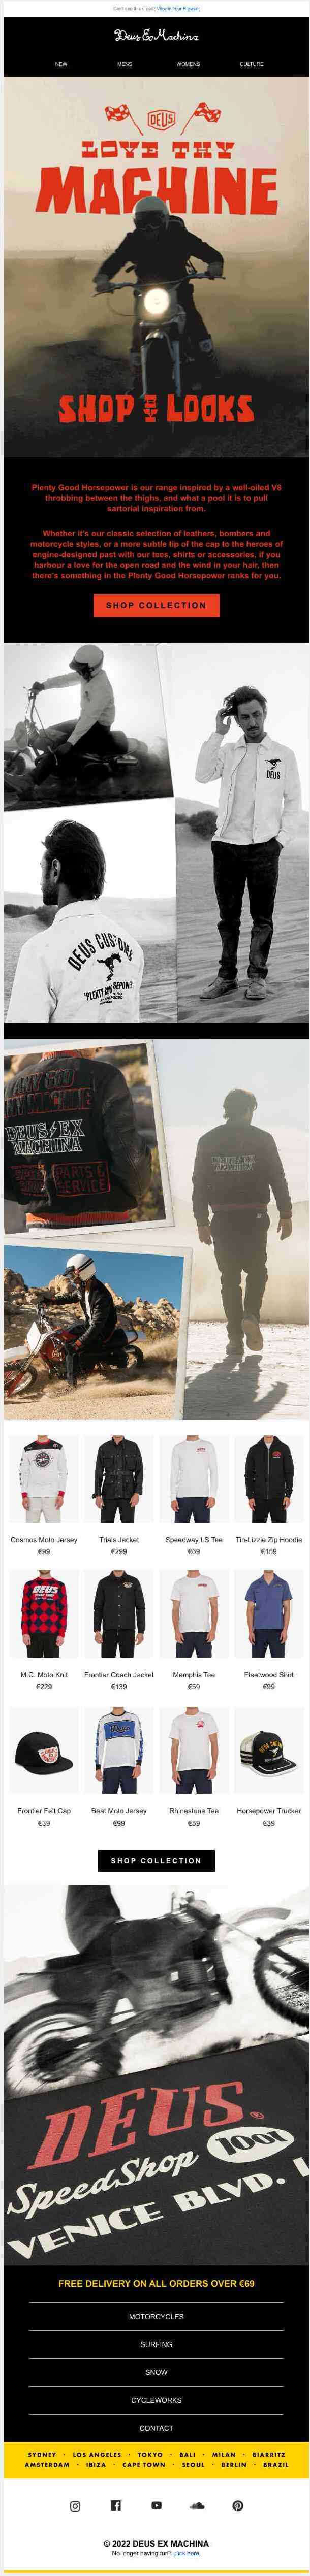 SHOP BY LOOK THE PLENTY GOOD HORSEPOWER COLLECTION